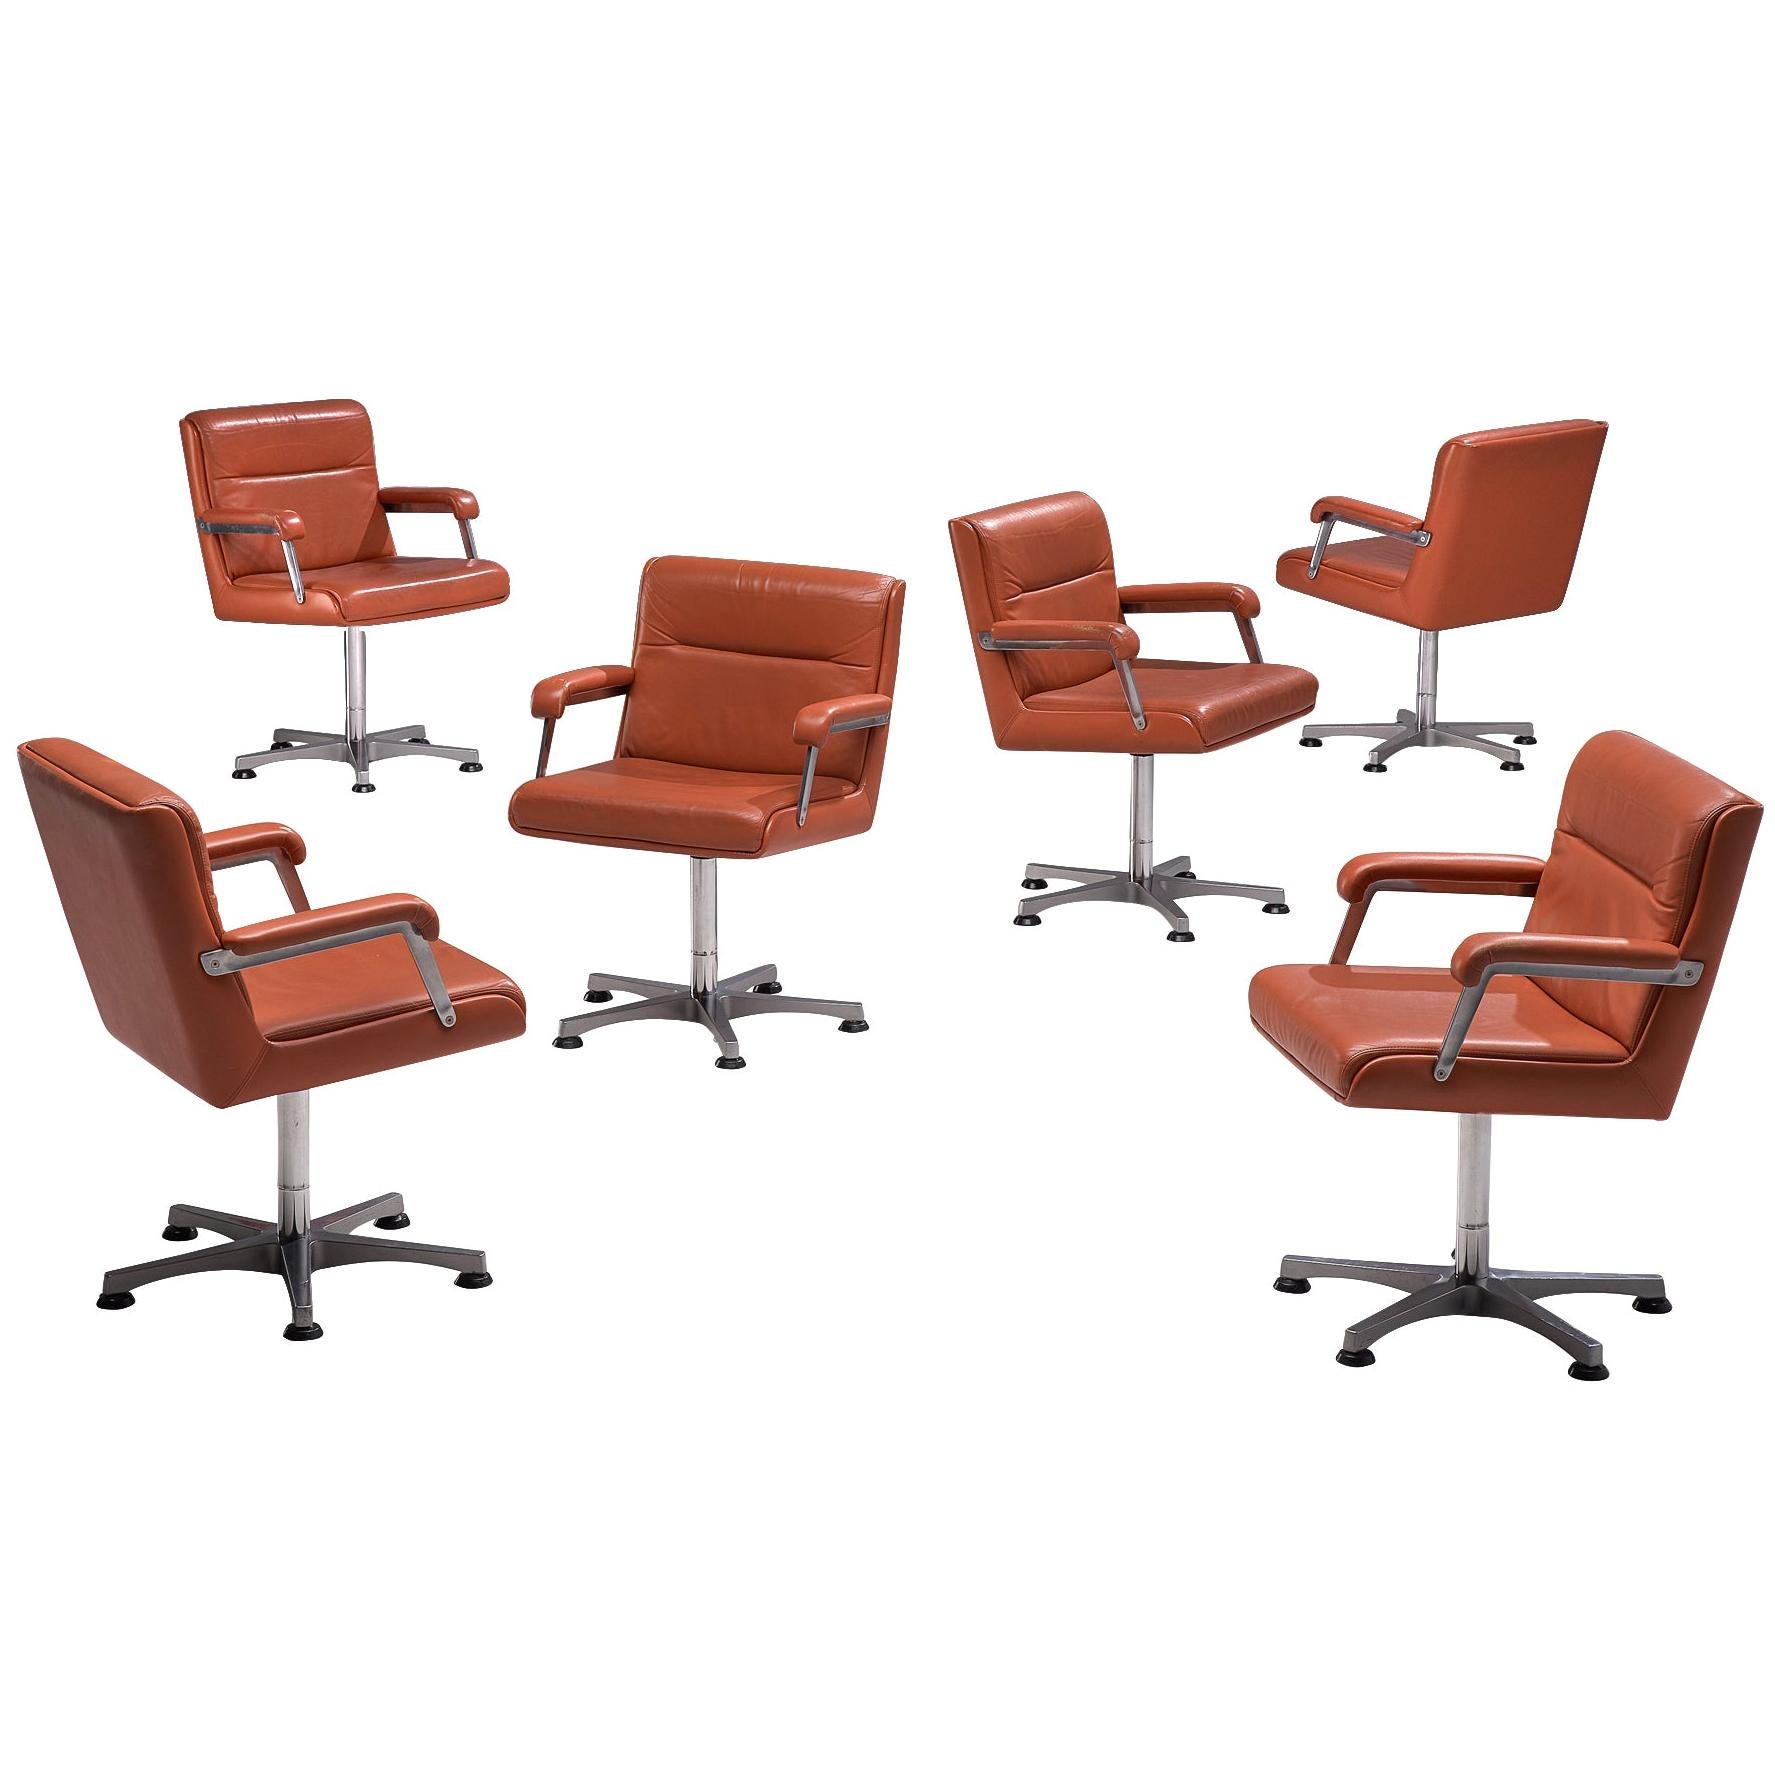 Six Norwegian Office Chairs in Terracotta Leather